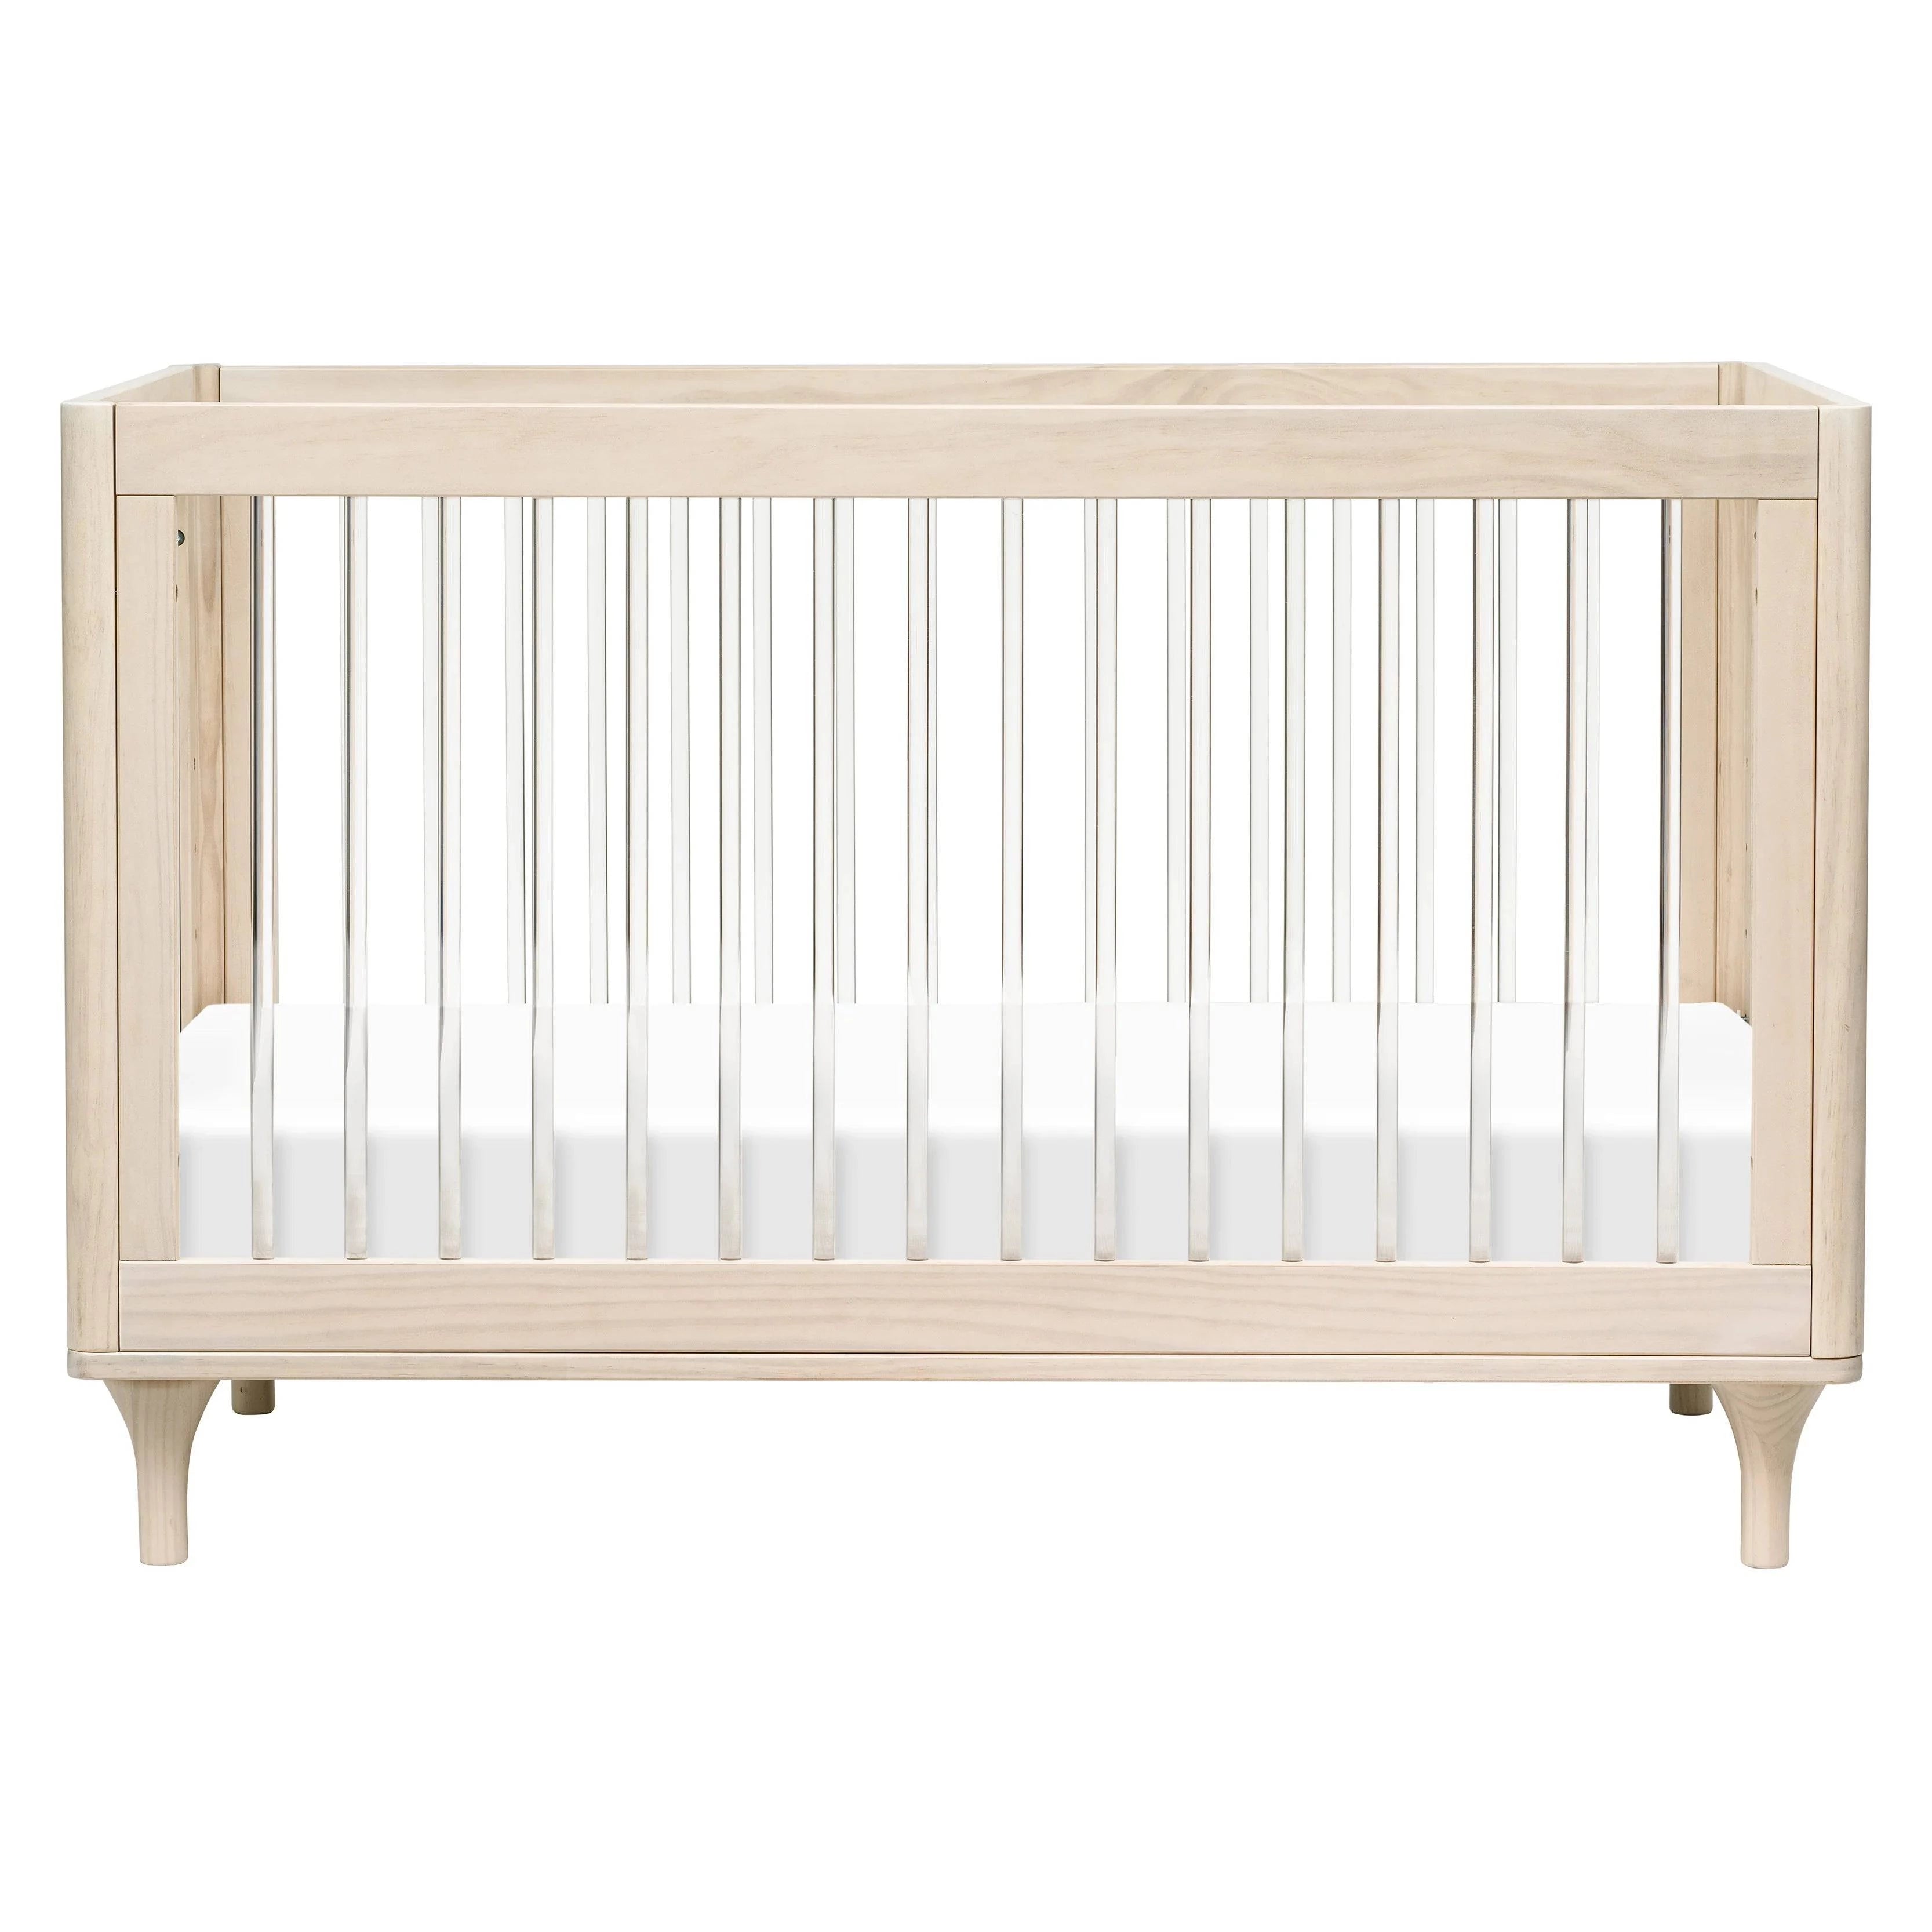 Lolly 3-in-1 Convertible Crib with Toddler Bed Conversion Kit - Twinkle Twinkle Little One